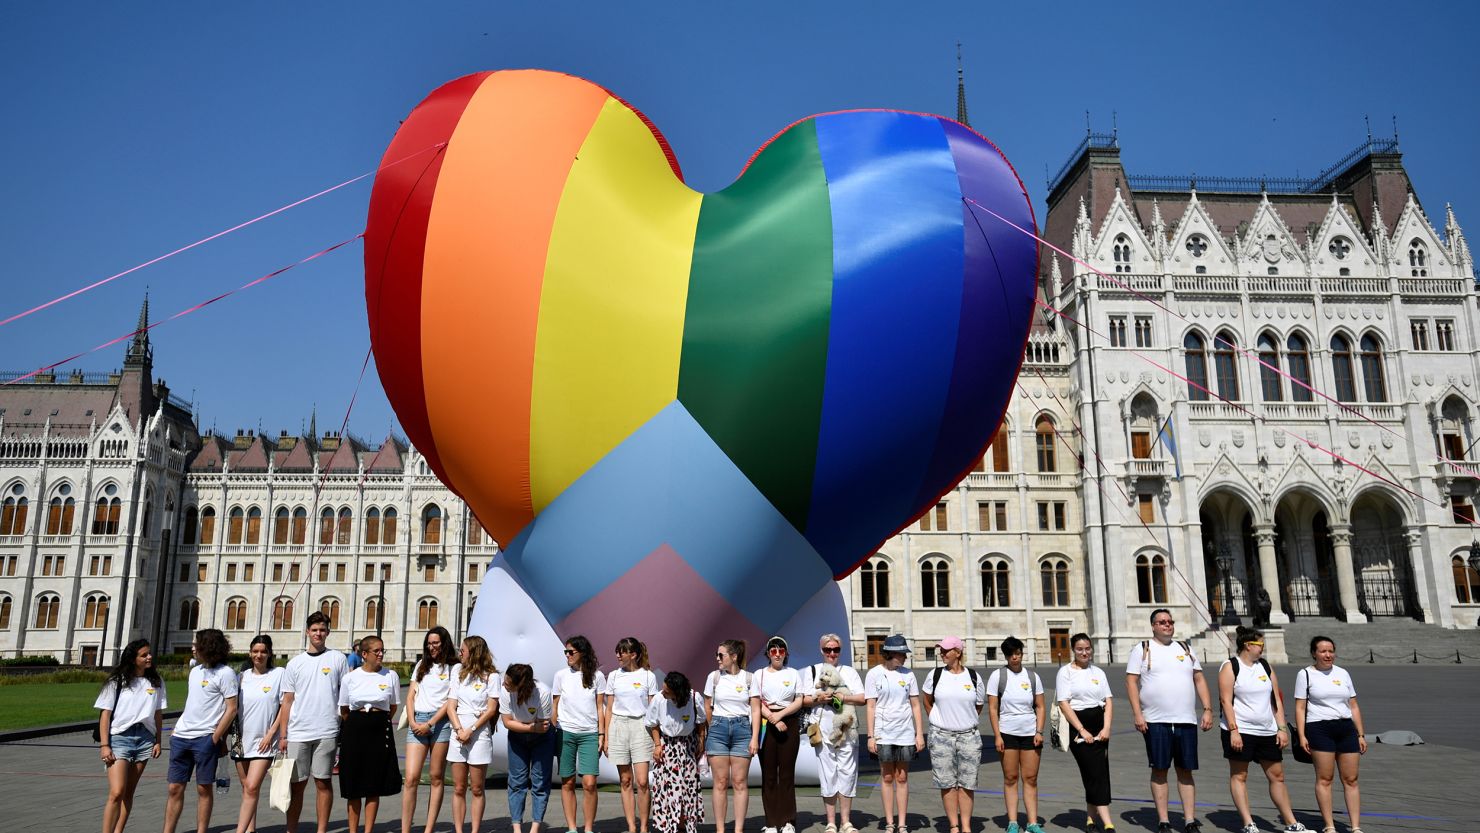 Activists protesting against what they say is an anti-LGBT law gather in front of a rainbow balloon at Hungary's parliament in  in Budapest on Thursday.